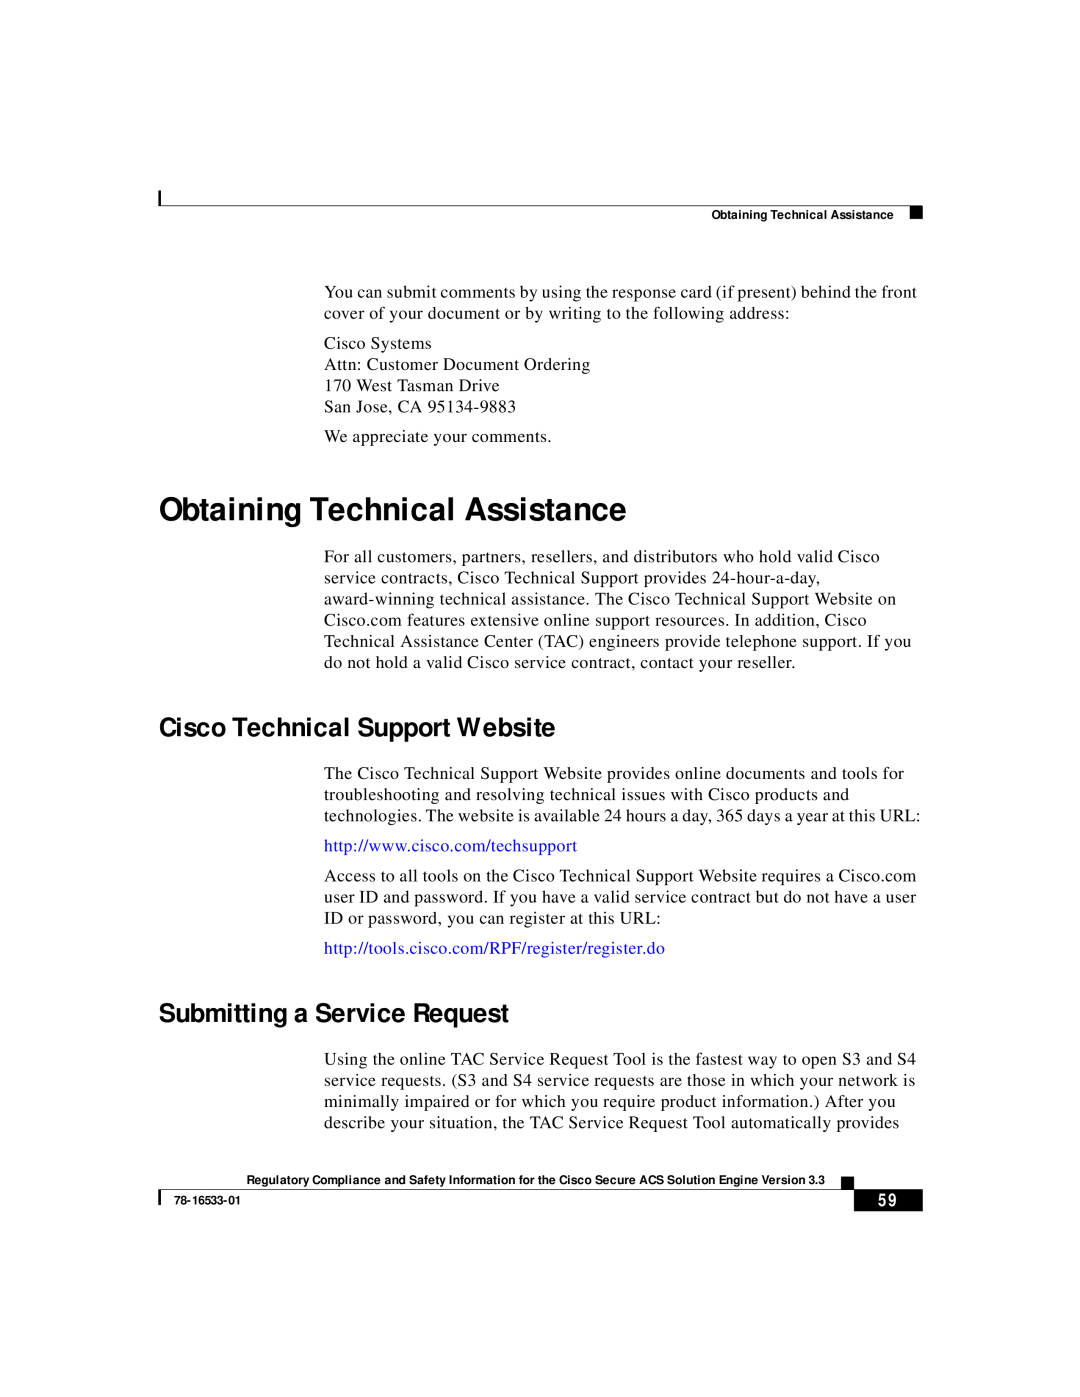 Cisco Systems CSACSE-1112-K9 Obtaining Technical Assistance, Cisco Technical Support Website, Submitting a Service Request 